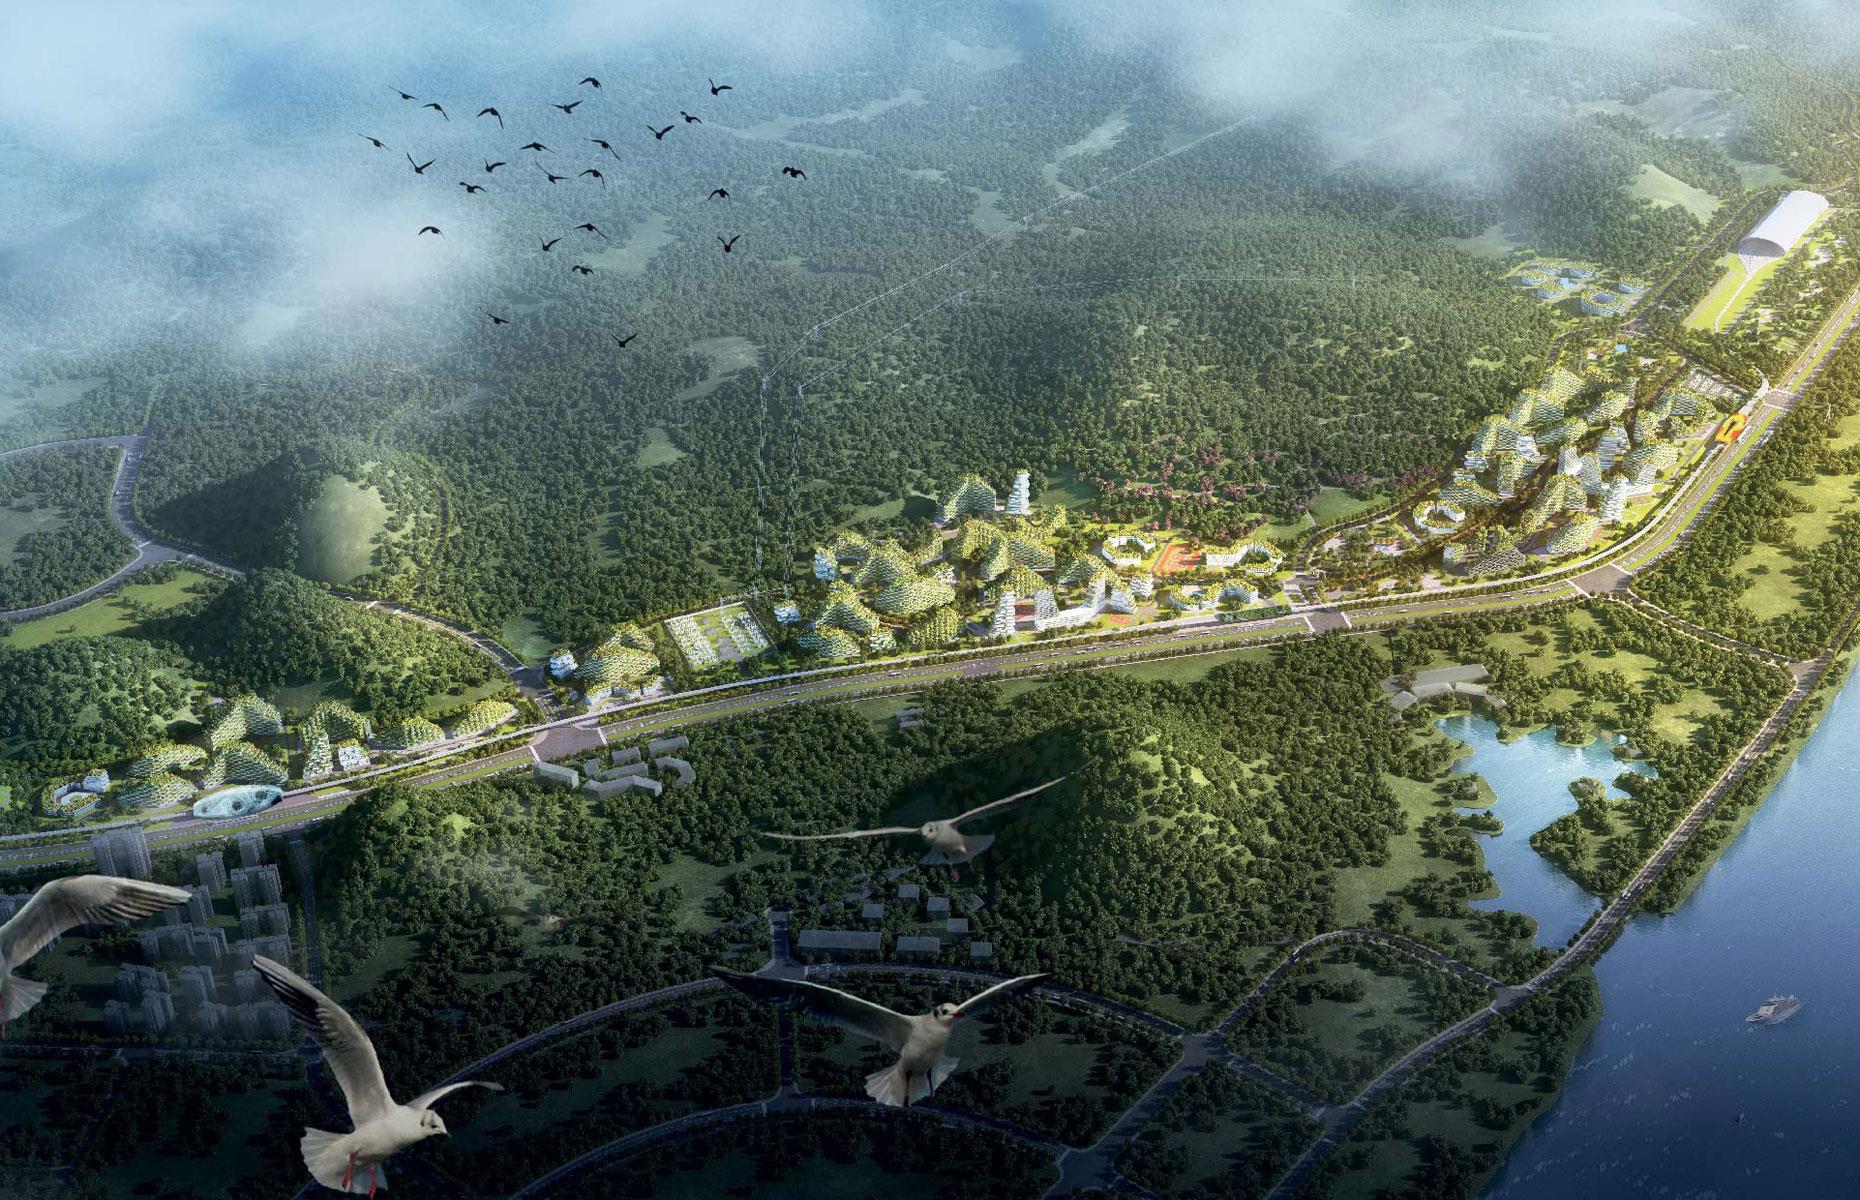 <p>Boeri is having a lot more luck thankfully with <a href="https://www.stefanoboeriarchitetti.net/project/liuzhou-masterplan-2/">Forest City Liuzhou</a>, his urban project in China's Guangxi Province. Conceived in 2016, the master plan has been given the green light and the city is currently under construction. Situated on a 434-acre site along the Liujiang River, the leafy locale will accommodate 30,000 people and feature 40,000 trees, plus a million plants from more than 100 species.</p>